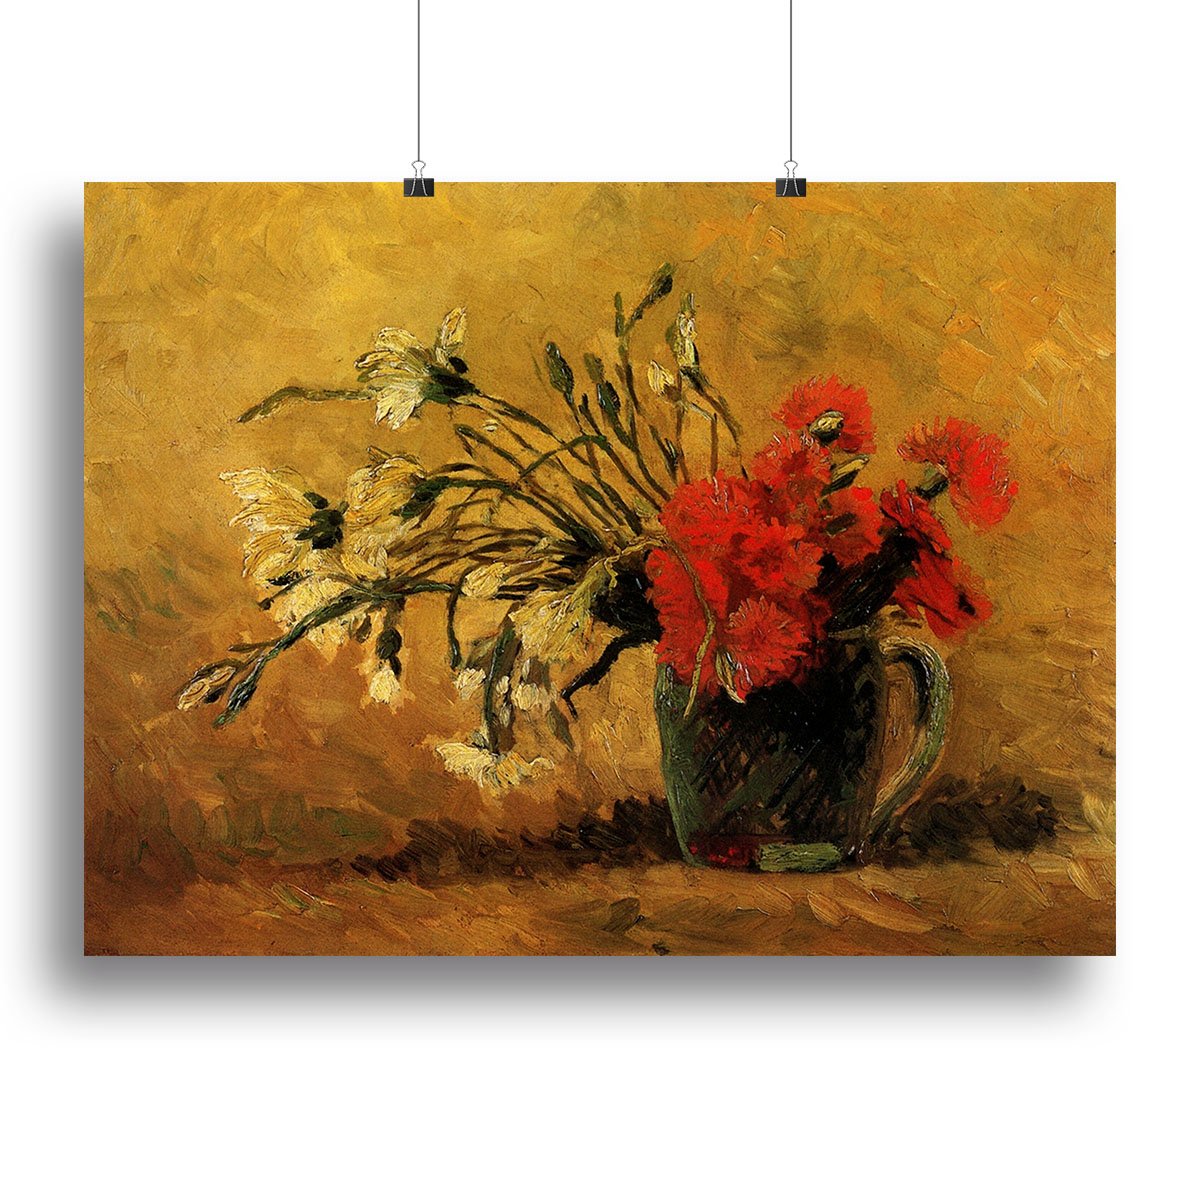 Vase with Red and White Carnations on Yellow Background by Van Gogh Canvas Print or Poster